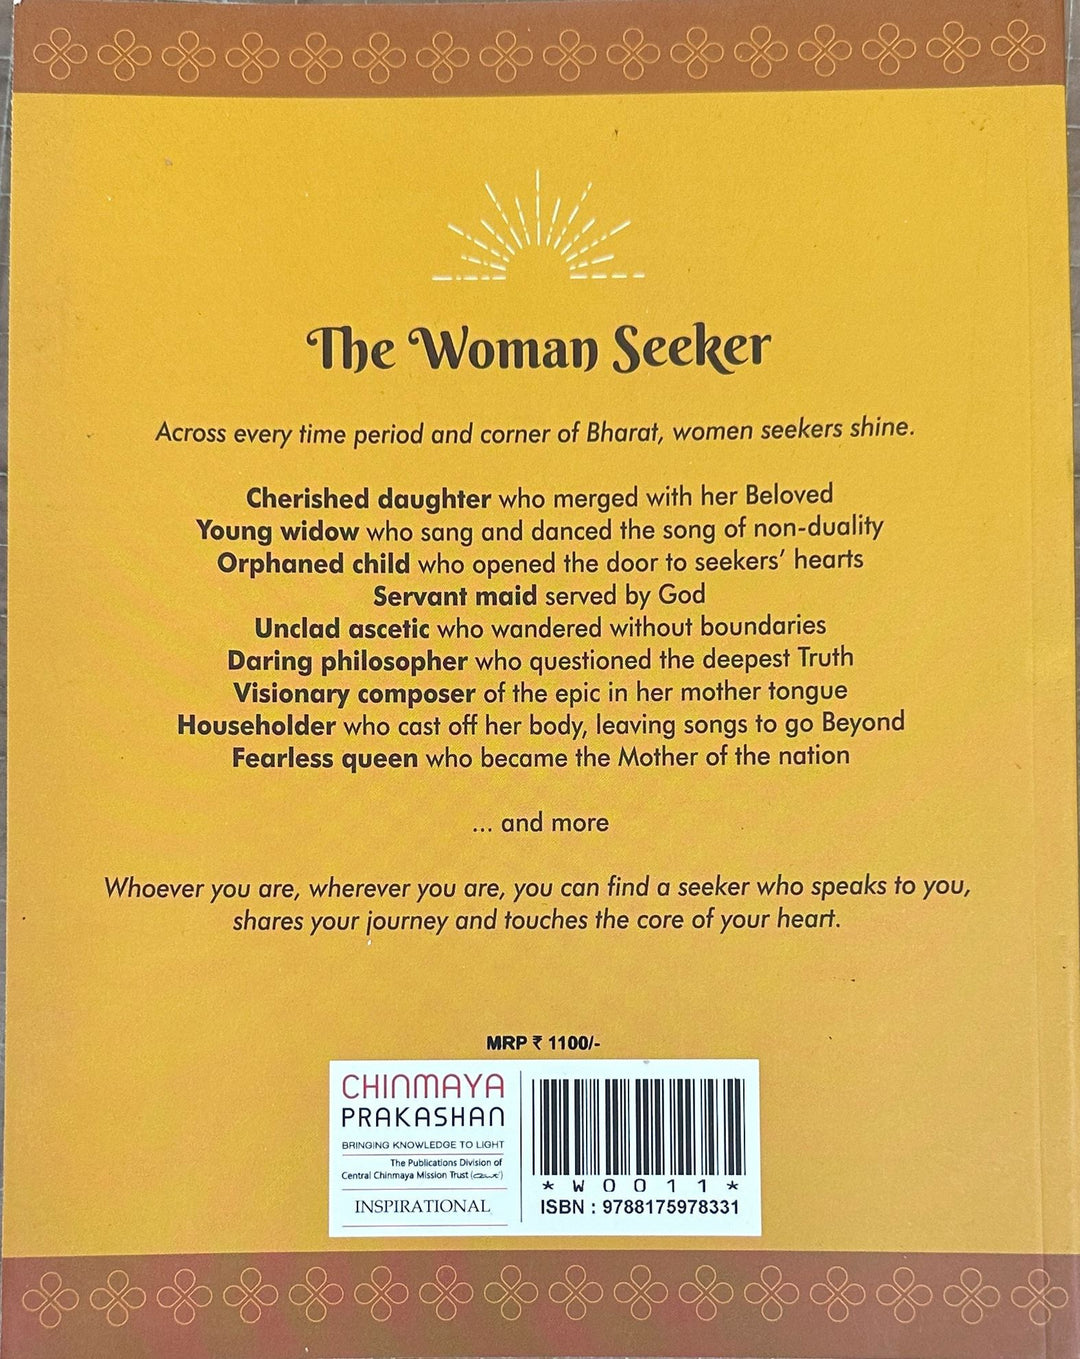 The Woman Seeker – 18 Devis and Their Journey to Enlightenment